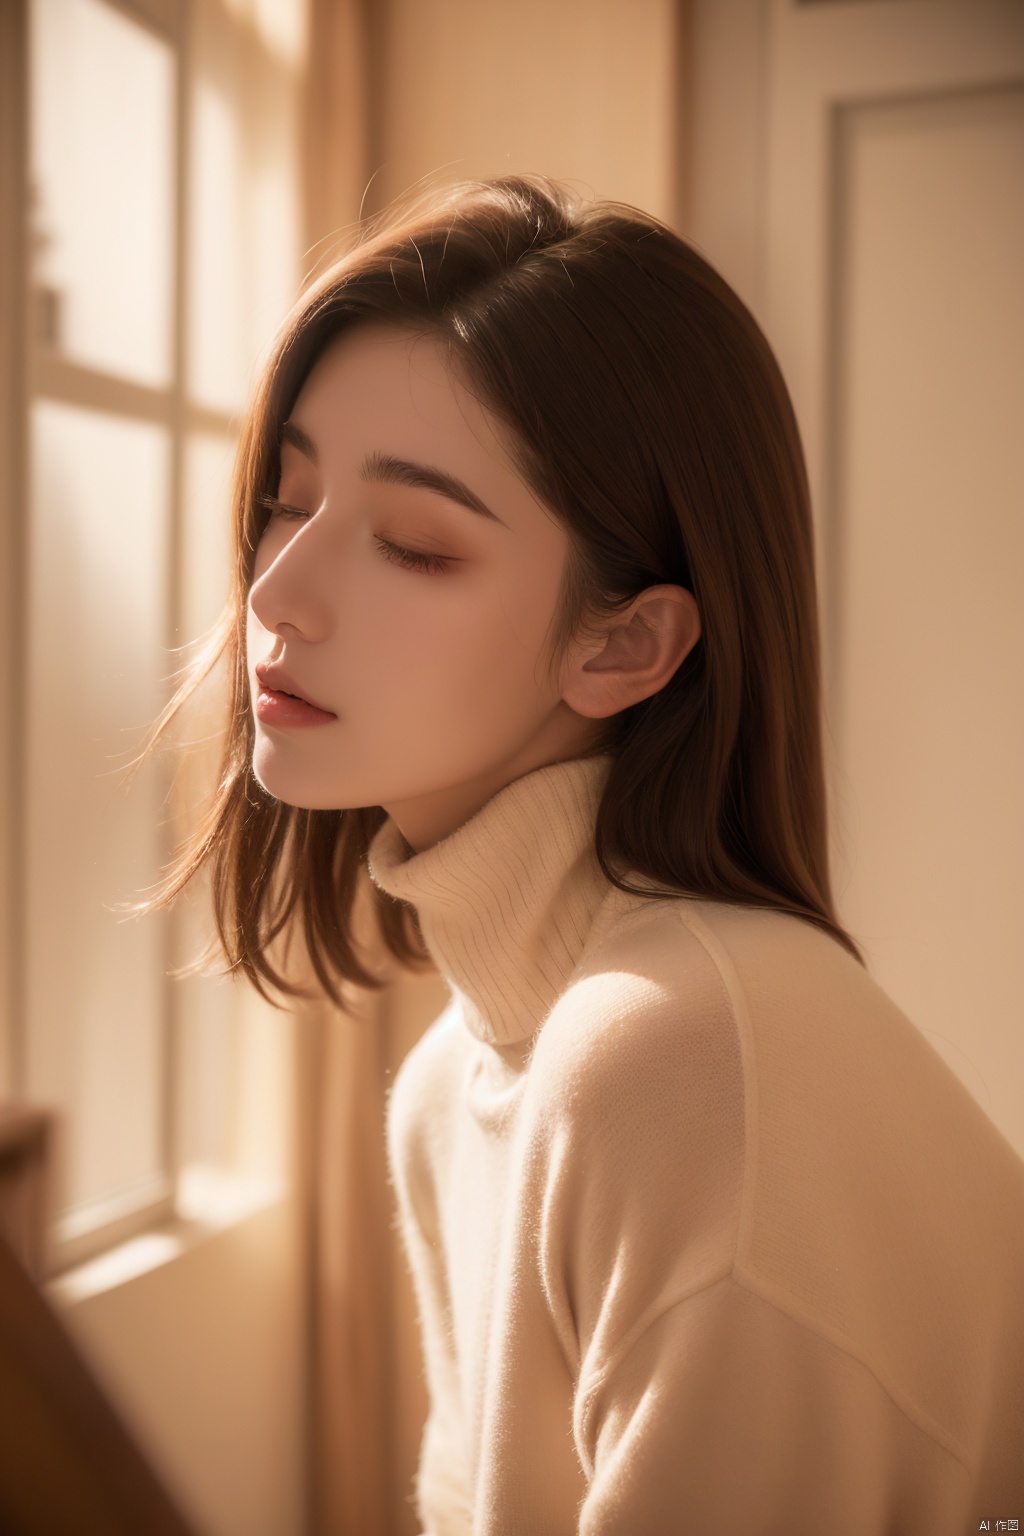  A girl ,23 yo,from Europe and America, with a side face, short brown hair, exposed ears, a high necked sweater, eyes closed, central composition, light